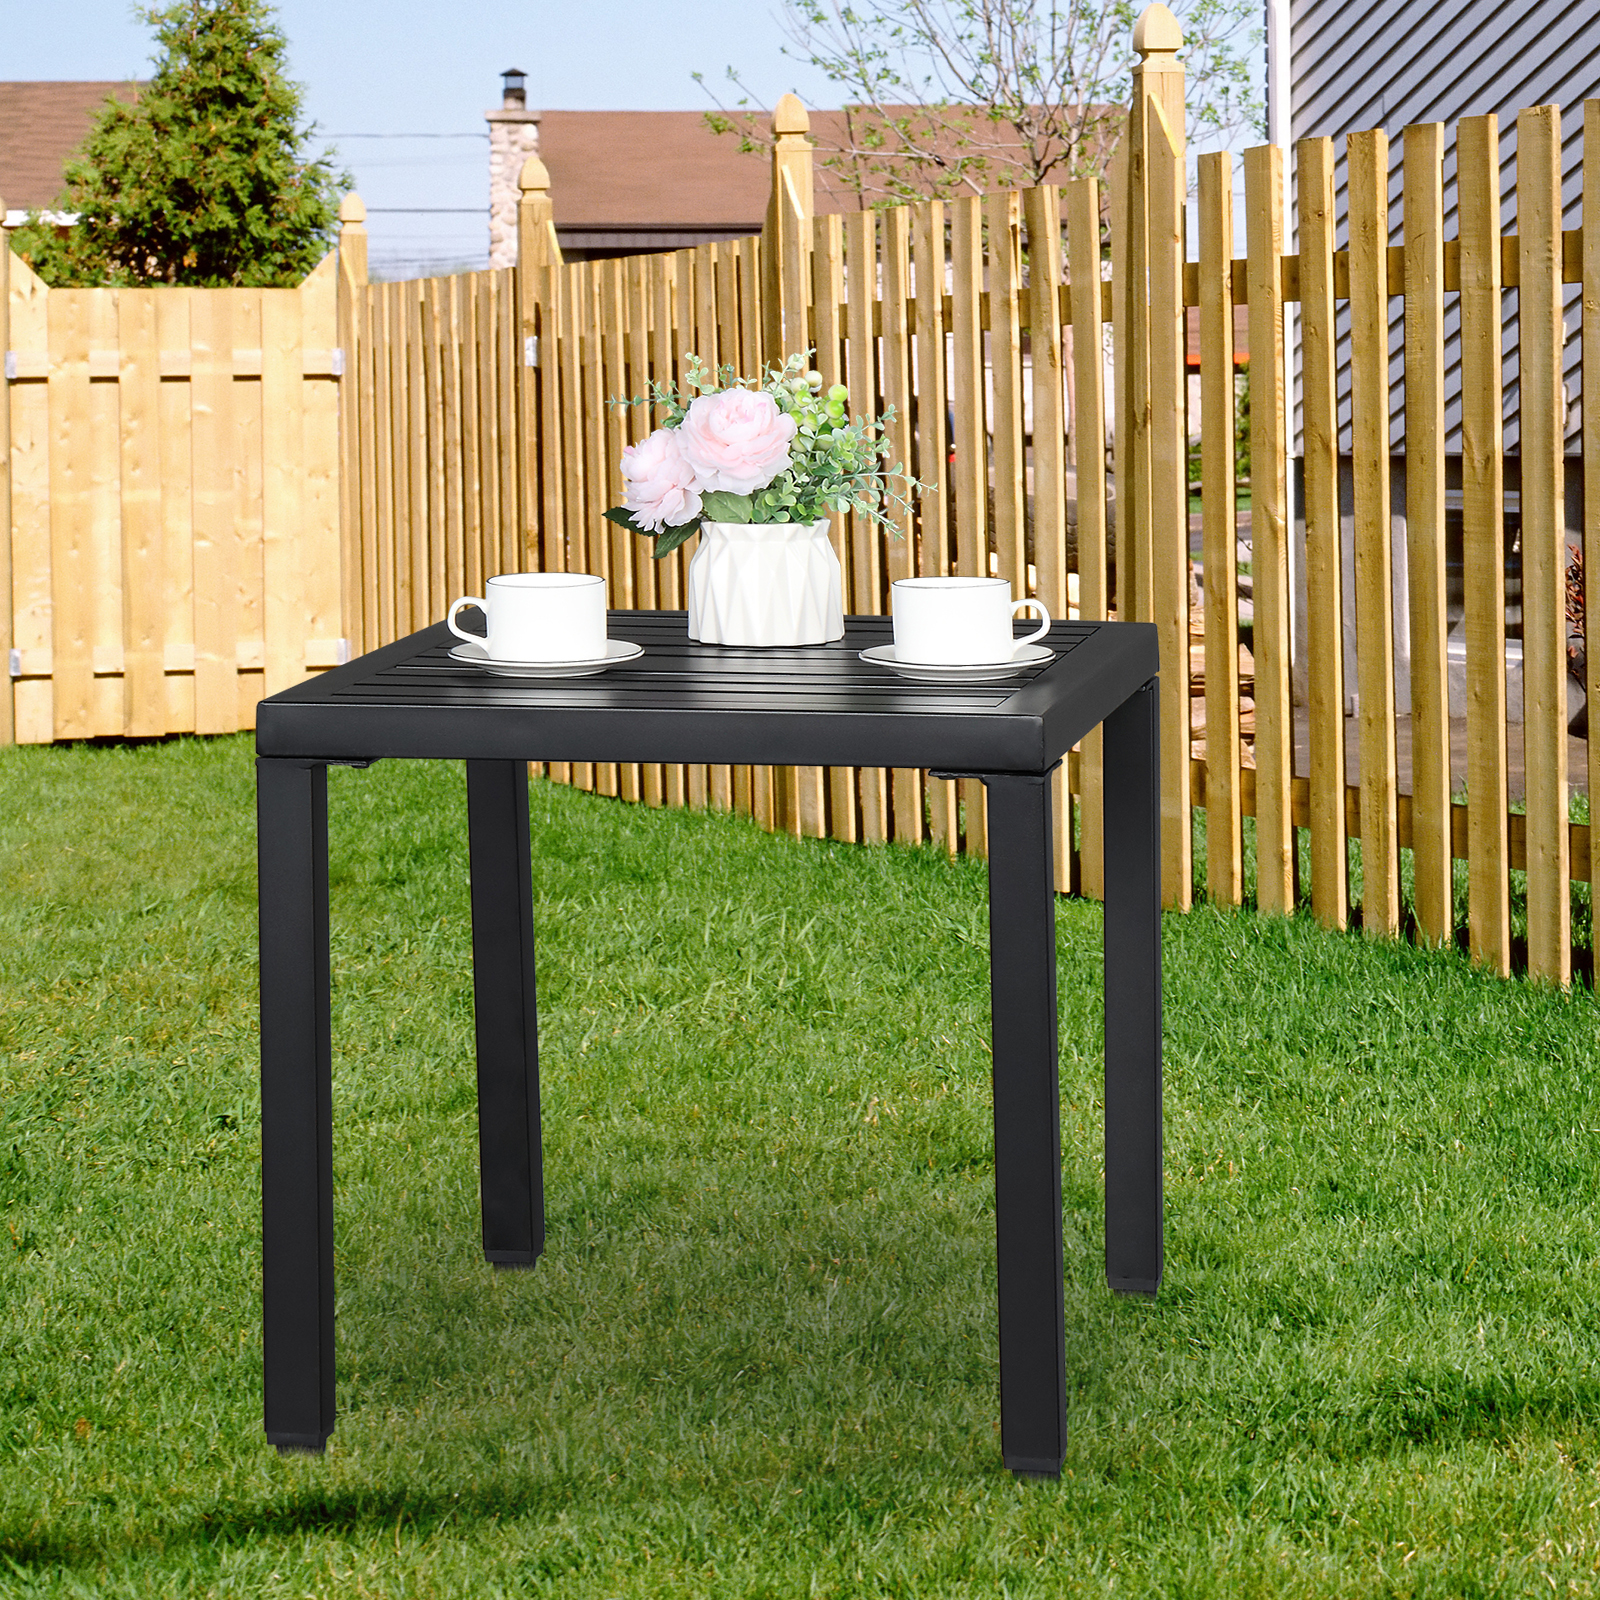 BTMWAY Metal Outdoor Dining Table, Patio Furniture Coffee Table Metal Side Table, Modern Square Tea Table Bar Table for Garden Yard Balcony Lawn Front Porch, Black - image 2 of 11